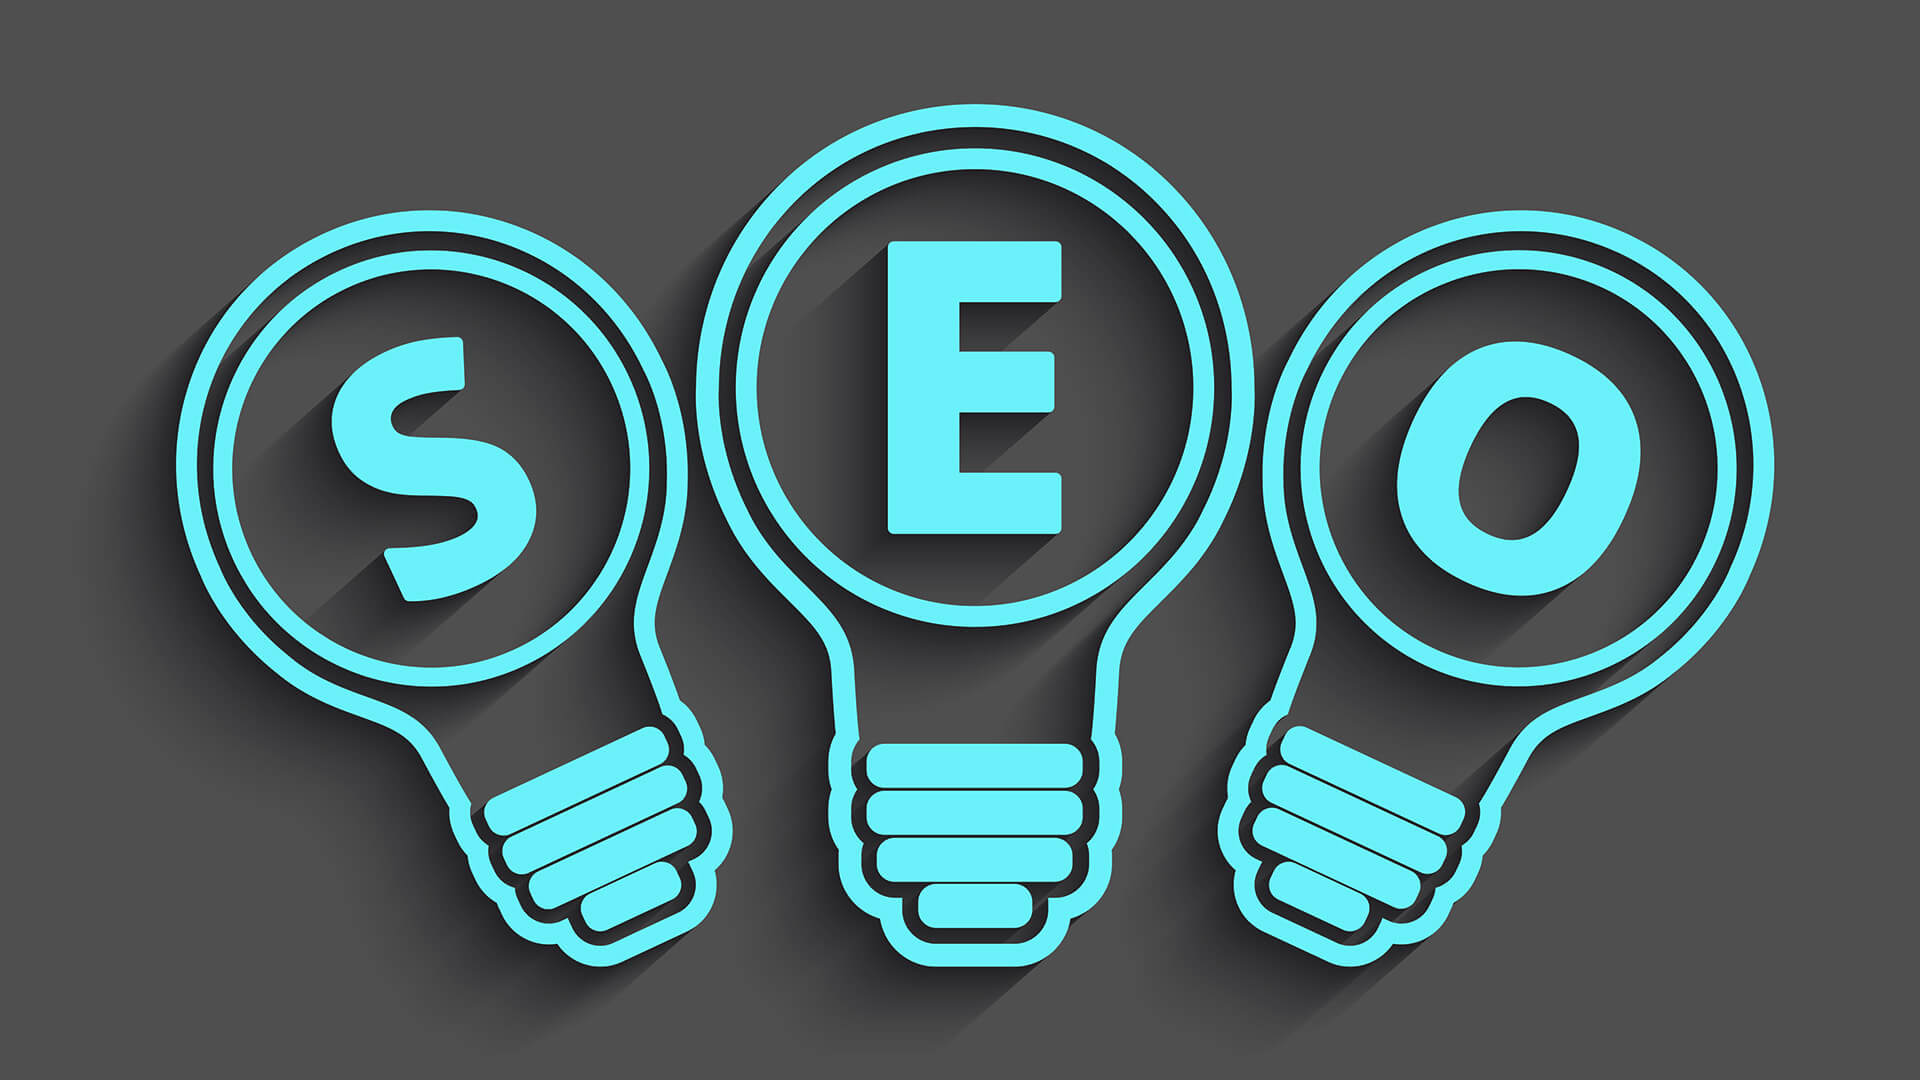 What Do You Need To Balance When Doing SEO?